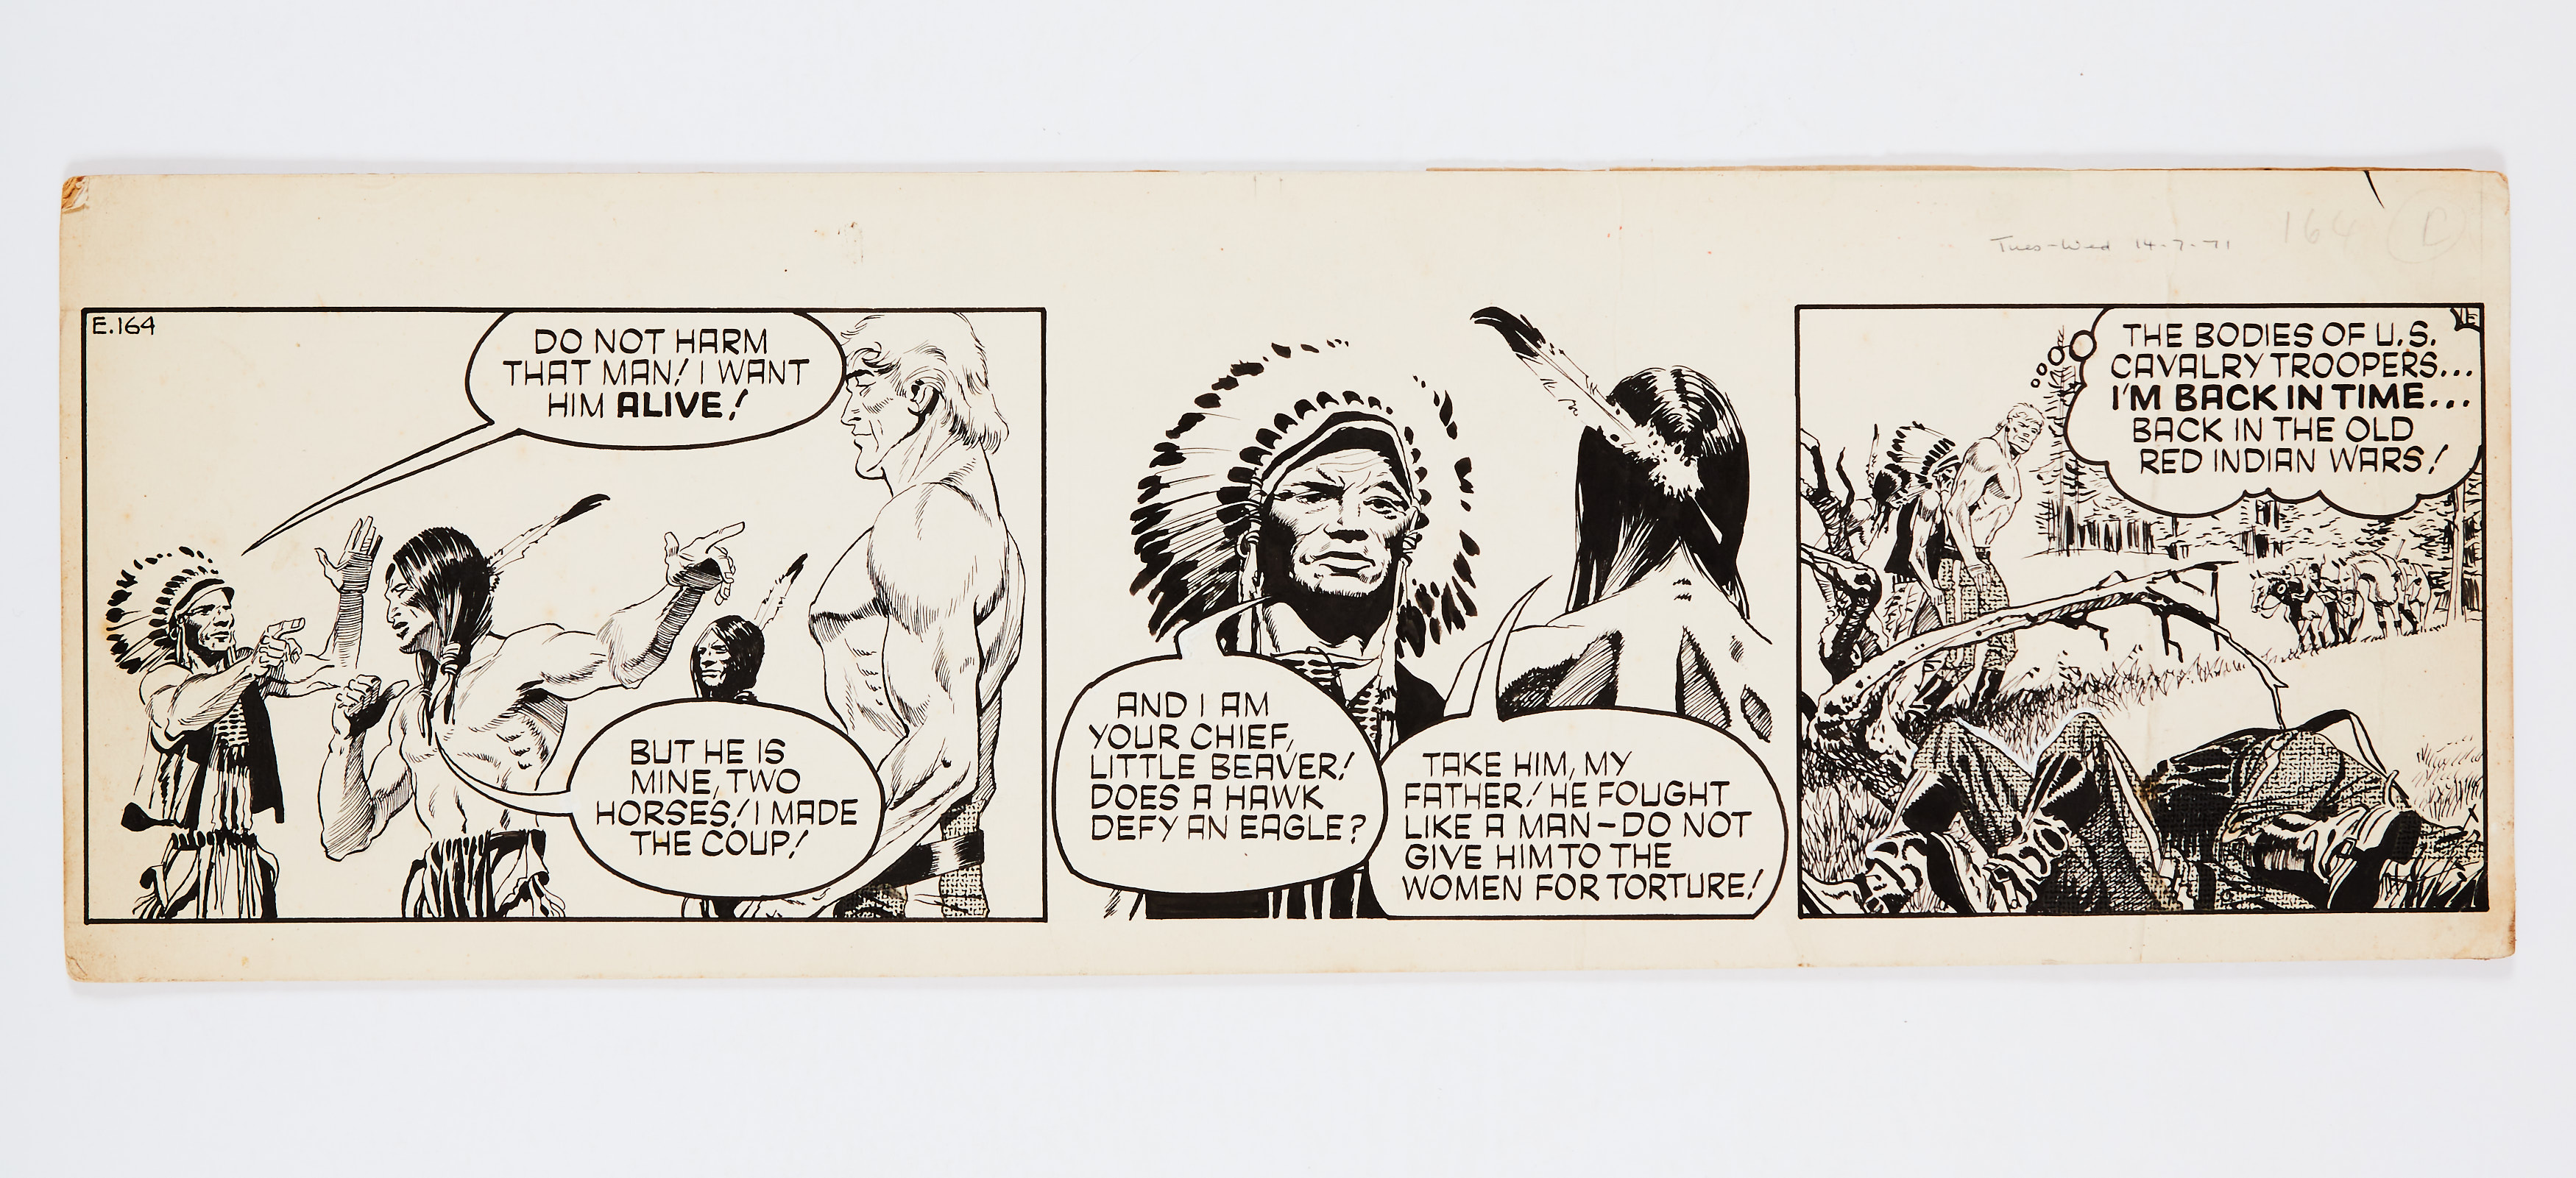 Garth original artwork by Frank Bellamy (with some third panel touches by John Allard). For the